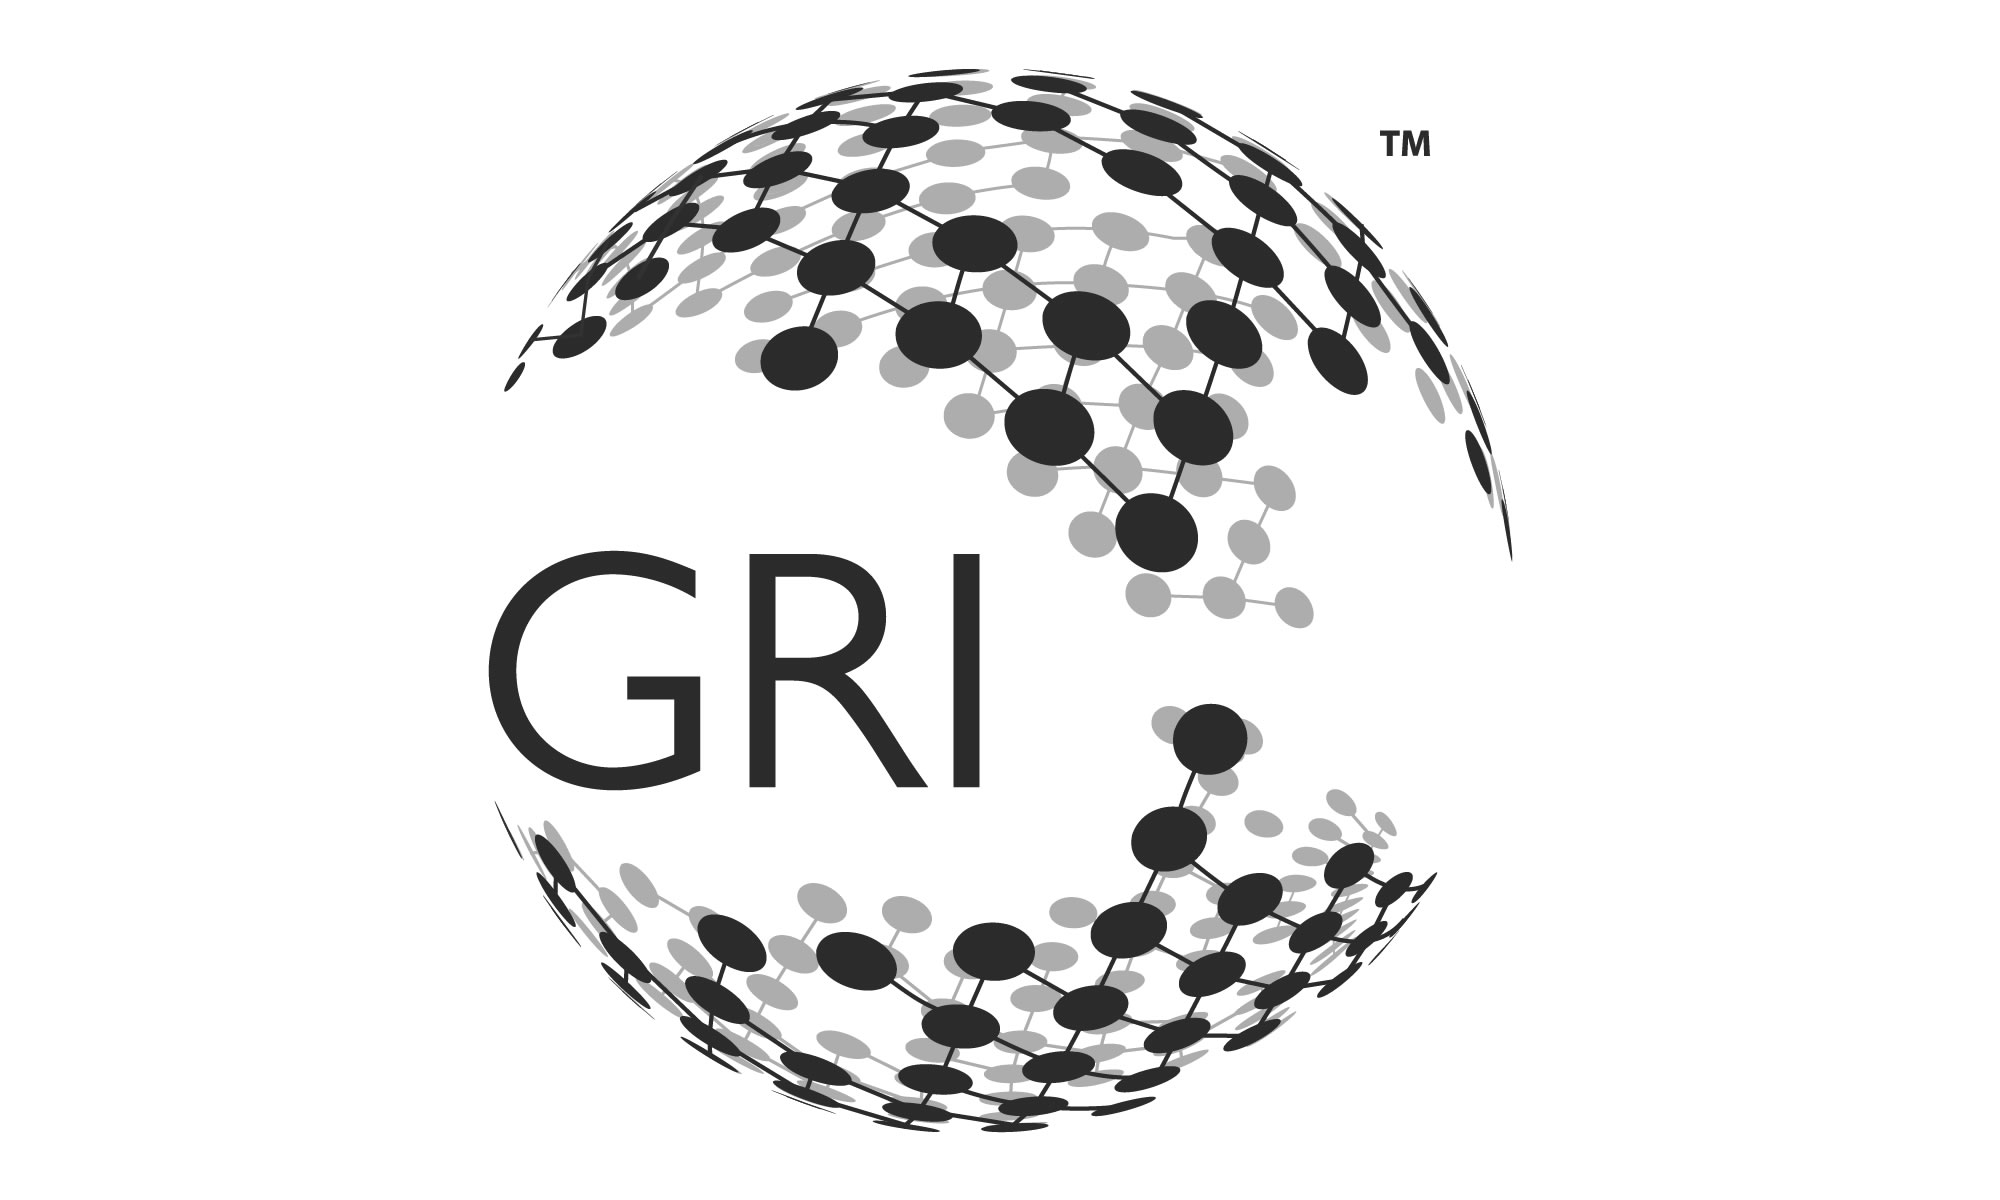 The Global Reporting Initiative (known as GRI) is an international independent standards organization that helps businesses, governments and other organizations understand and communicate their impacts on issues such as climate change, human rights and corruption.